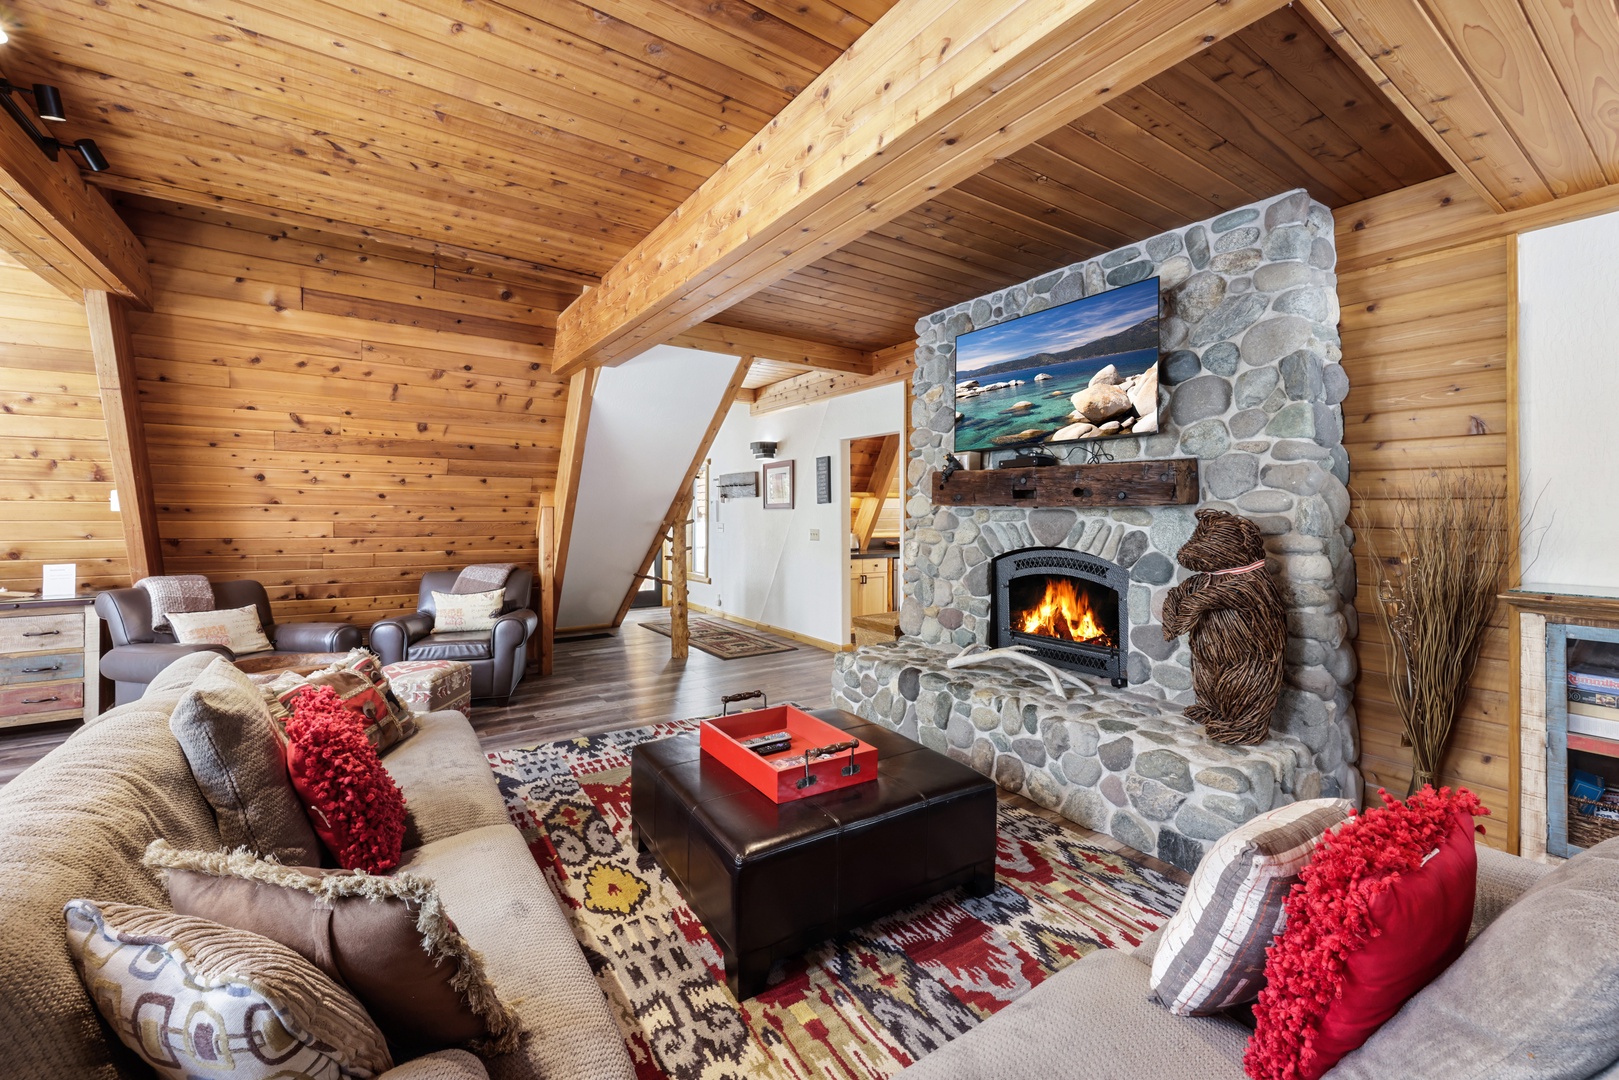 Cozy and spacious living area with TV and fireplace